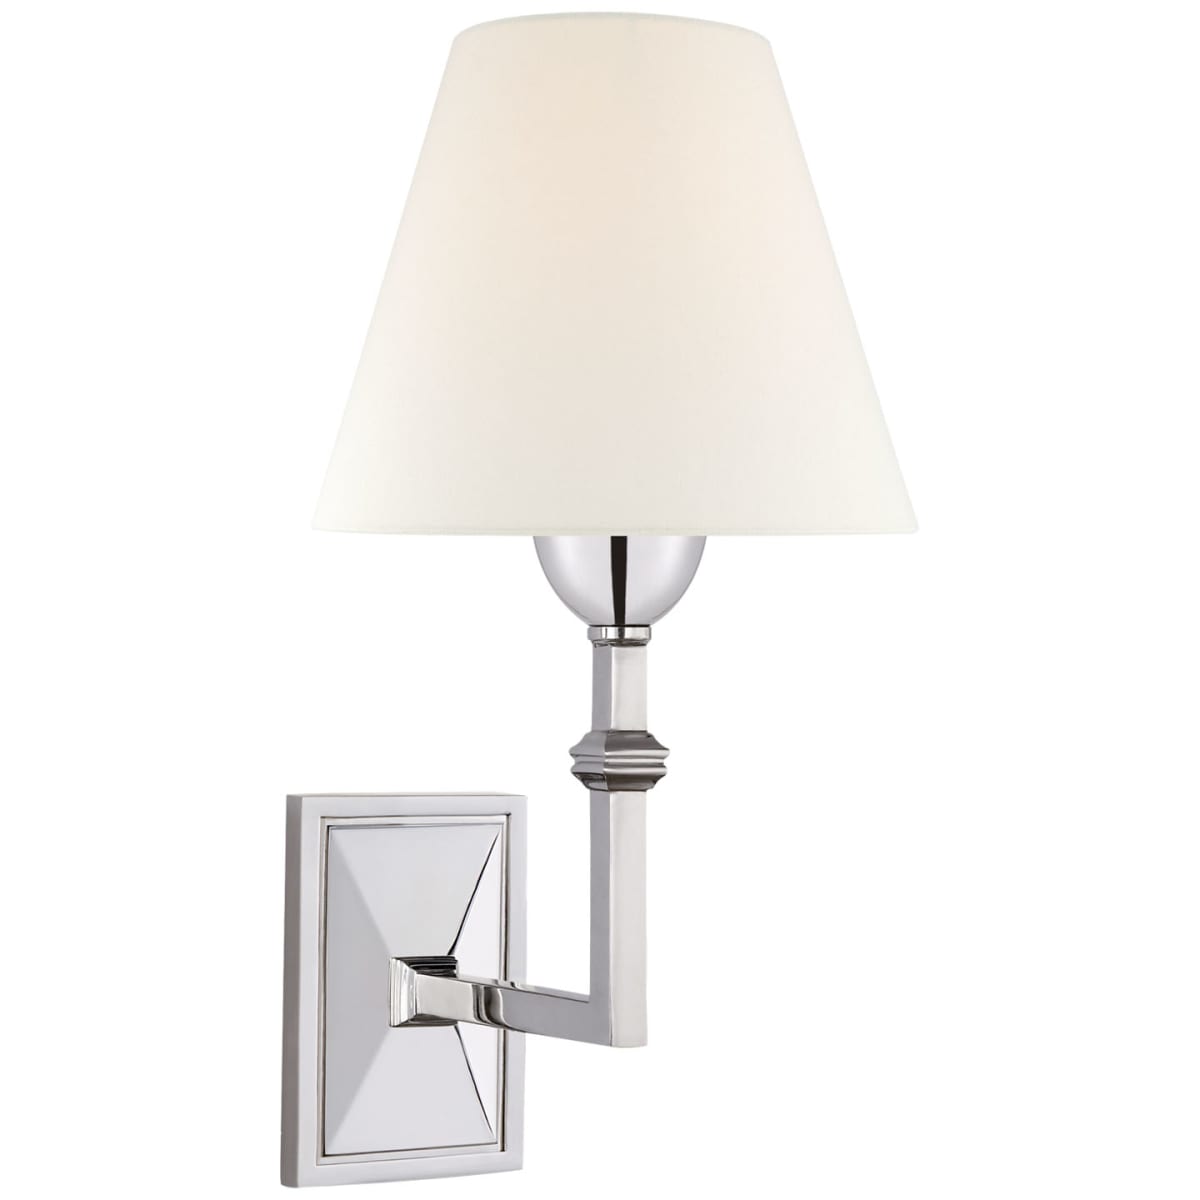 OBAH2305HABNP in Hand-rubbed Antique Brass by Visual Comfort in Frankfort,  KY - Jane Wall Sconce in Hand-Rubbed Antique Brass with Natural Paper Shade  Open Box